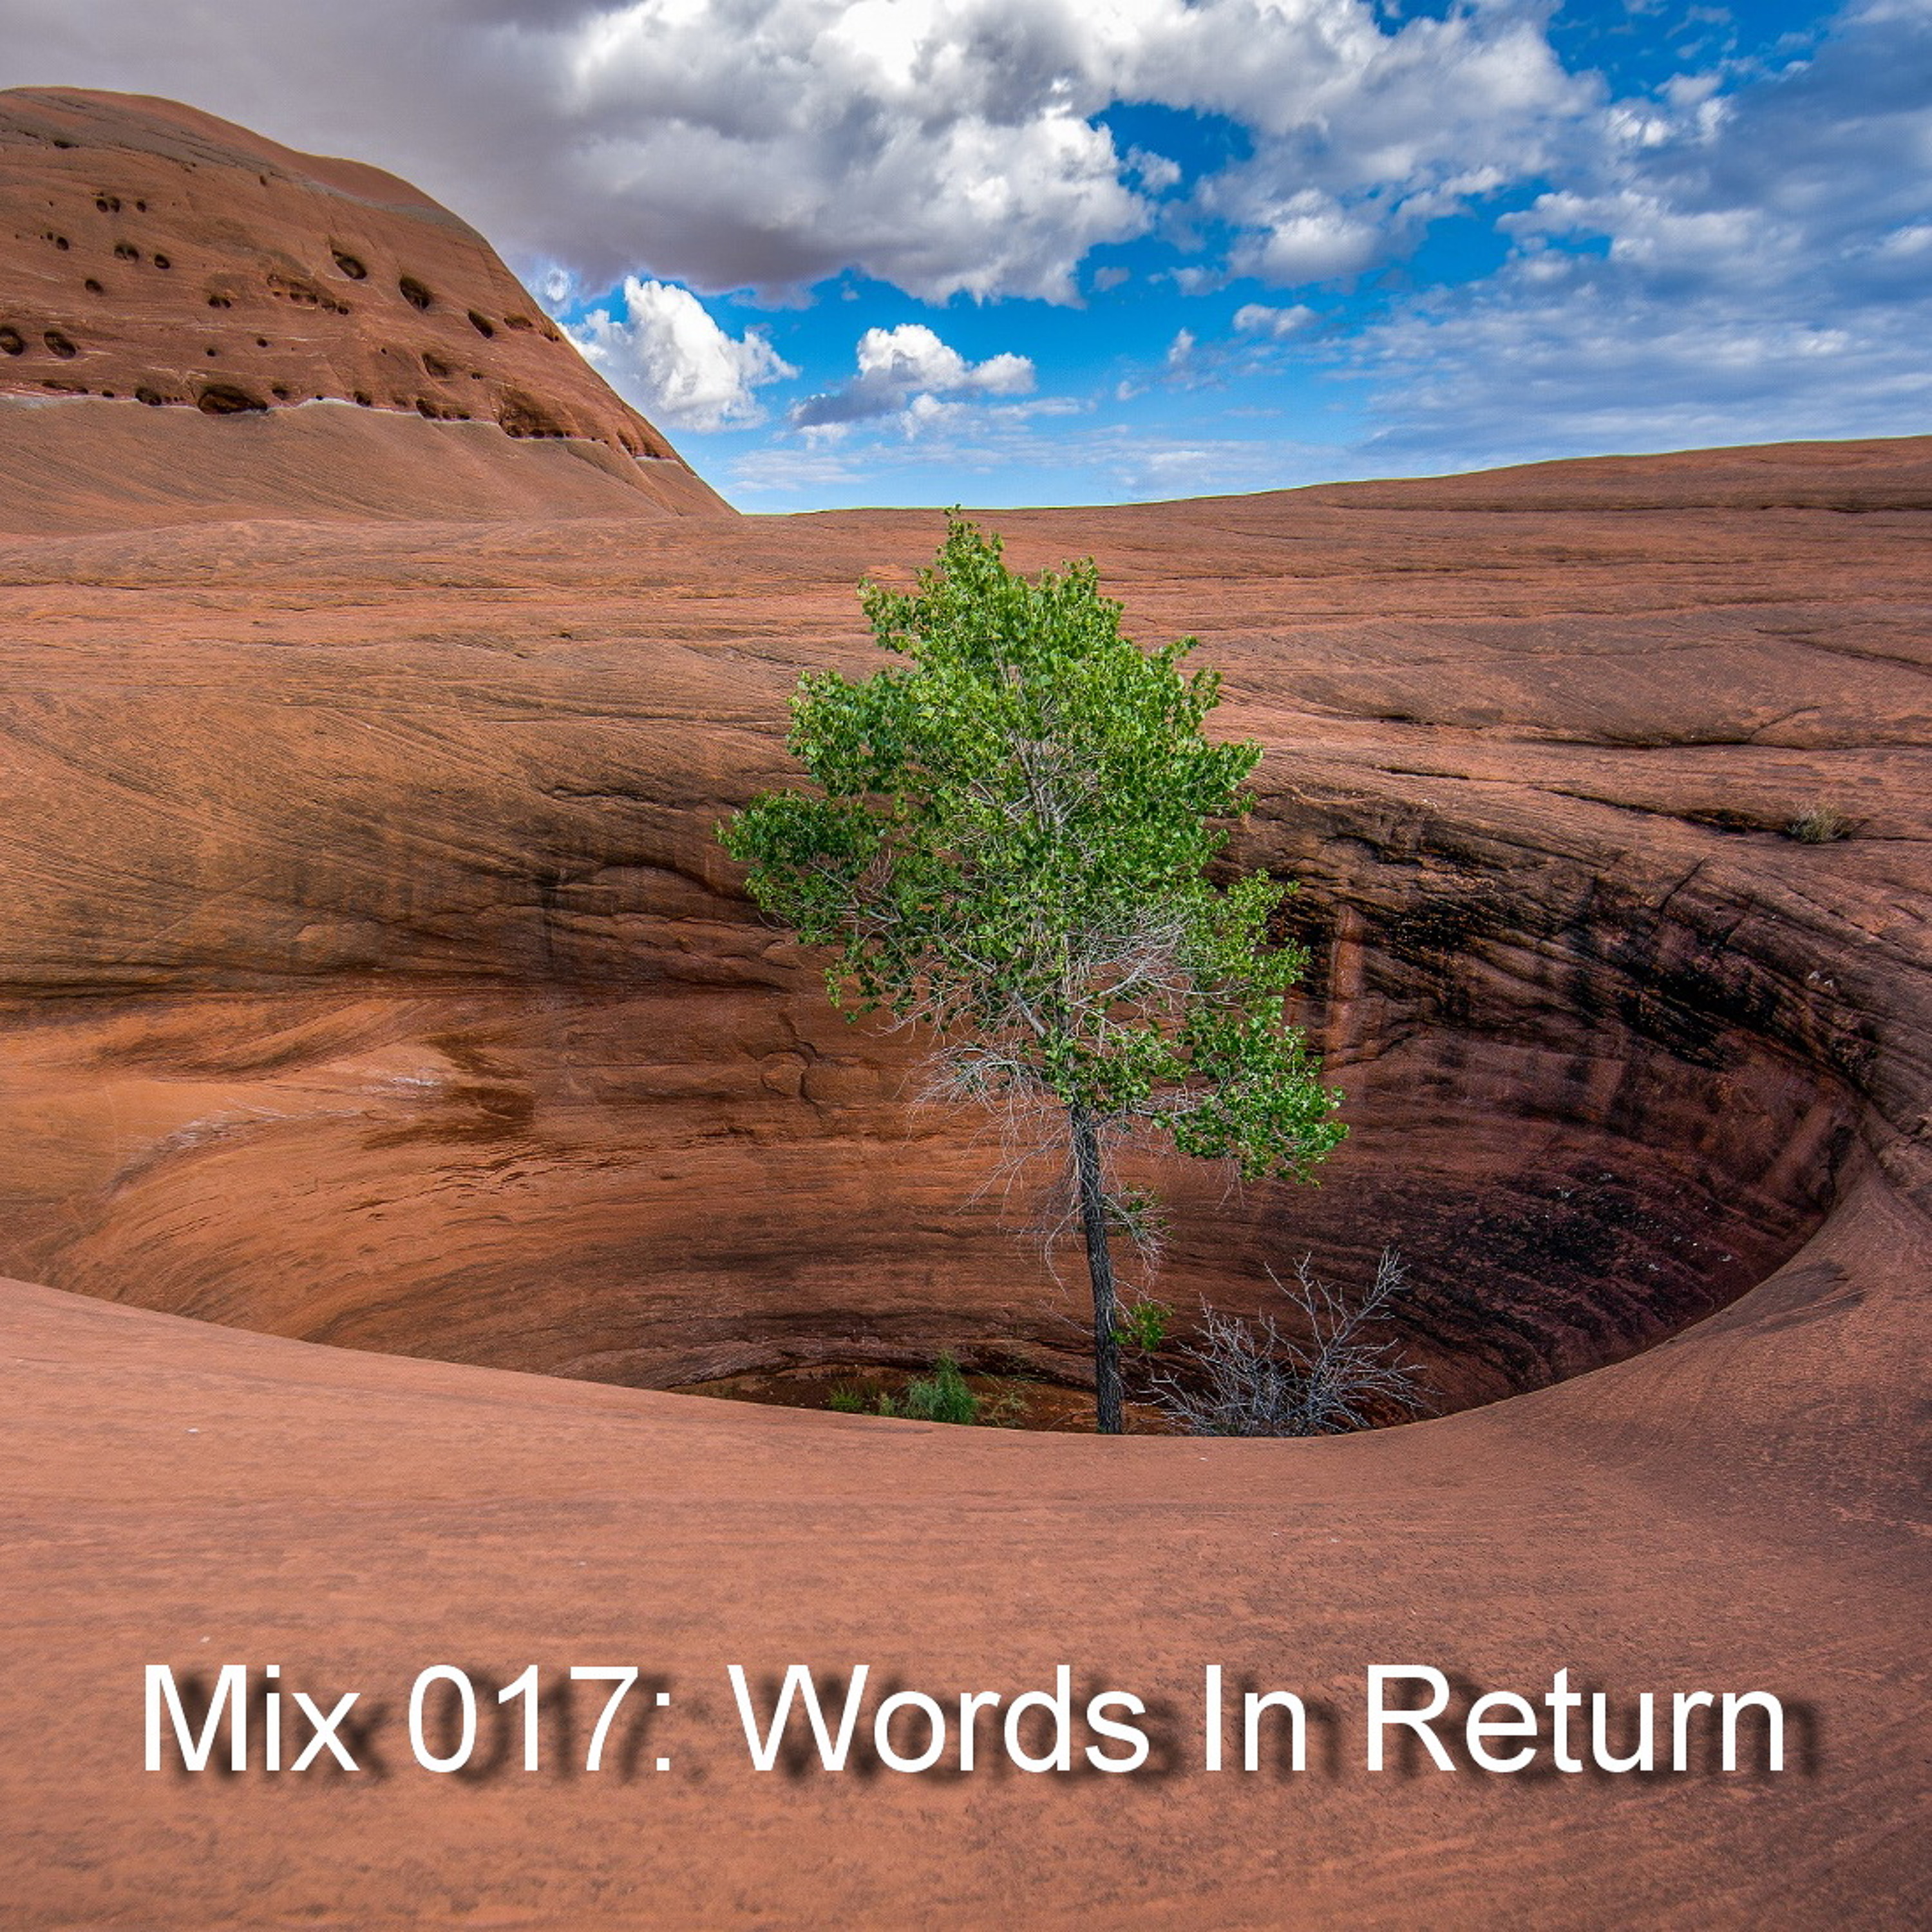 Mix 017: Words In Return